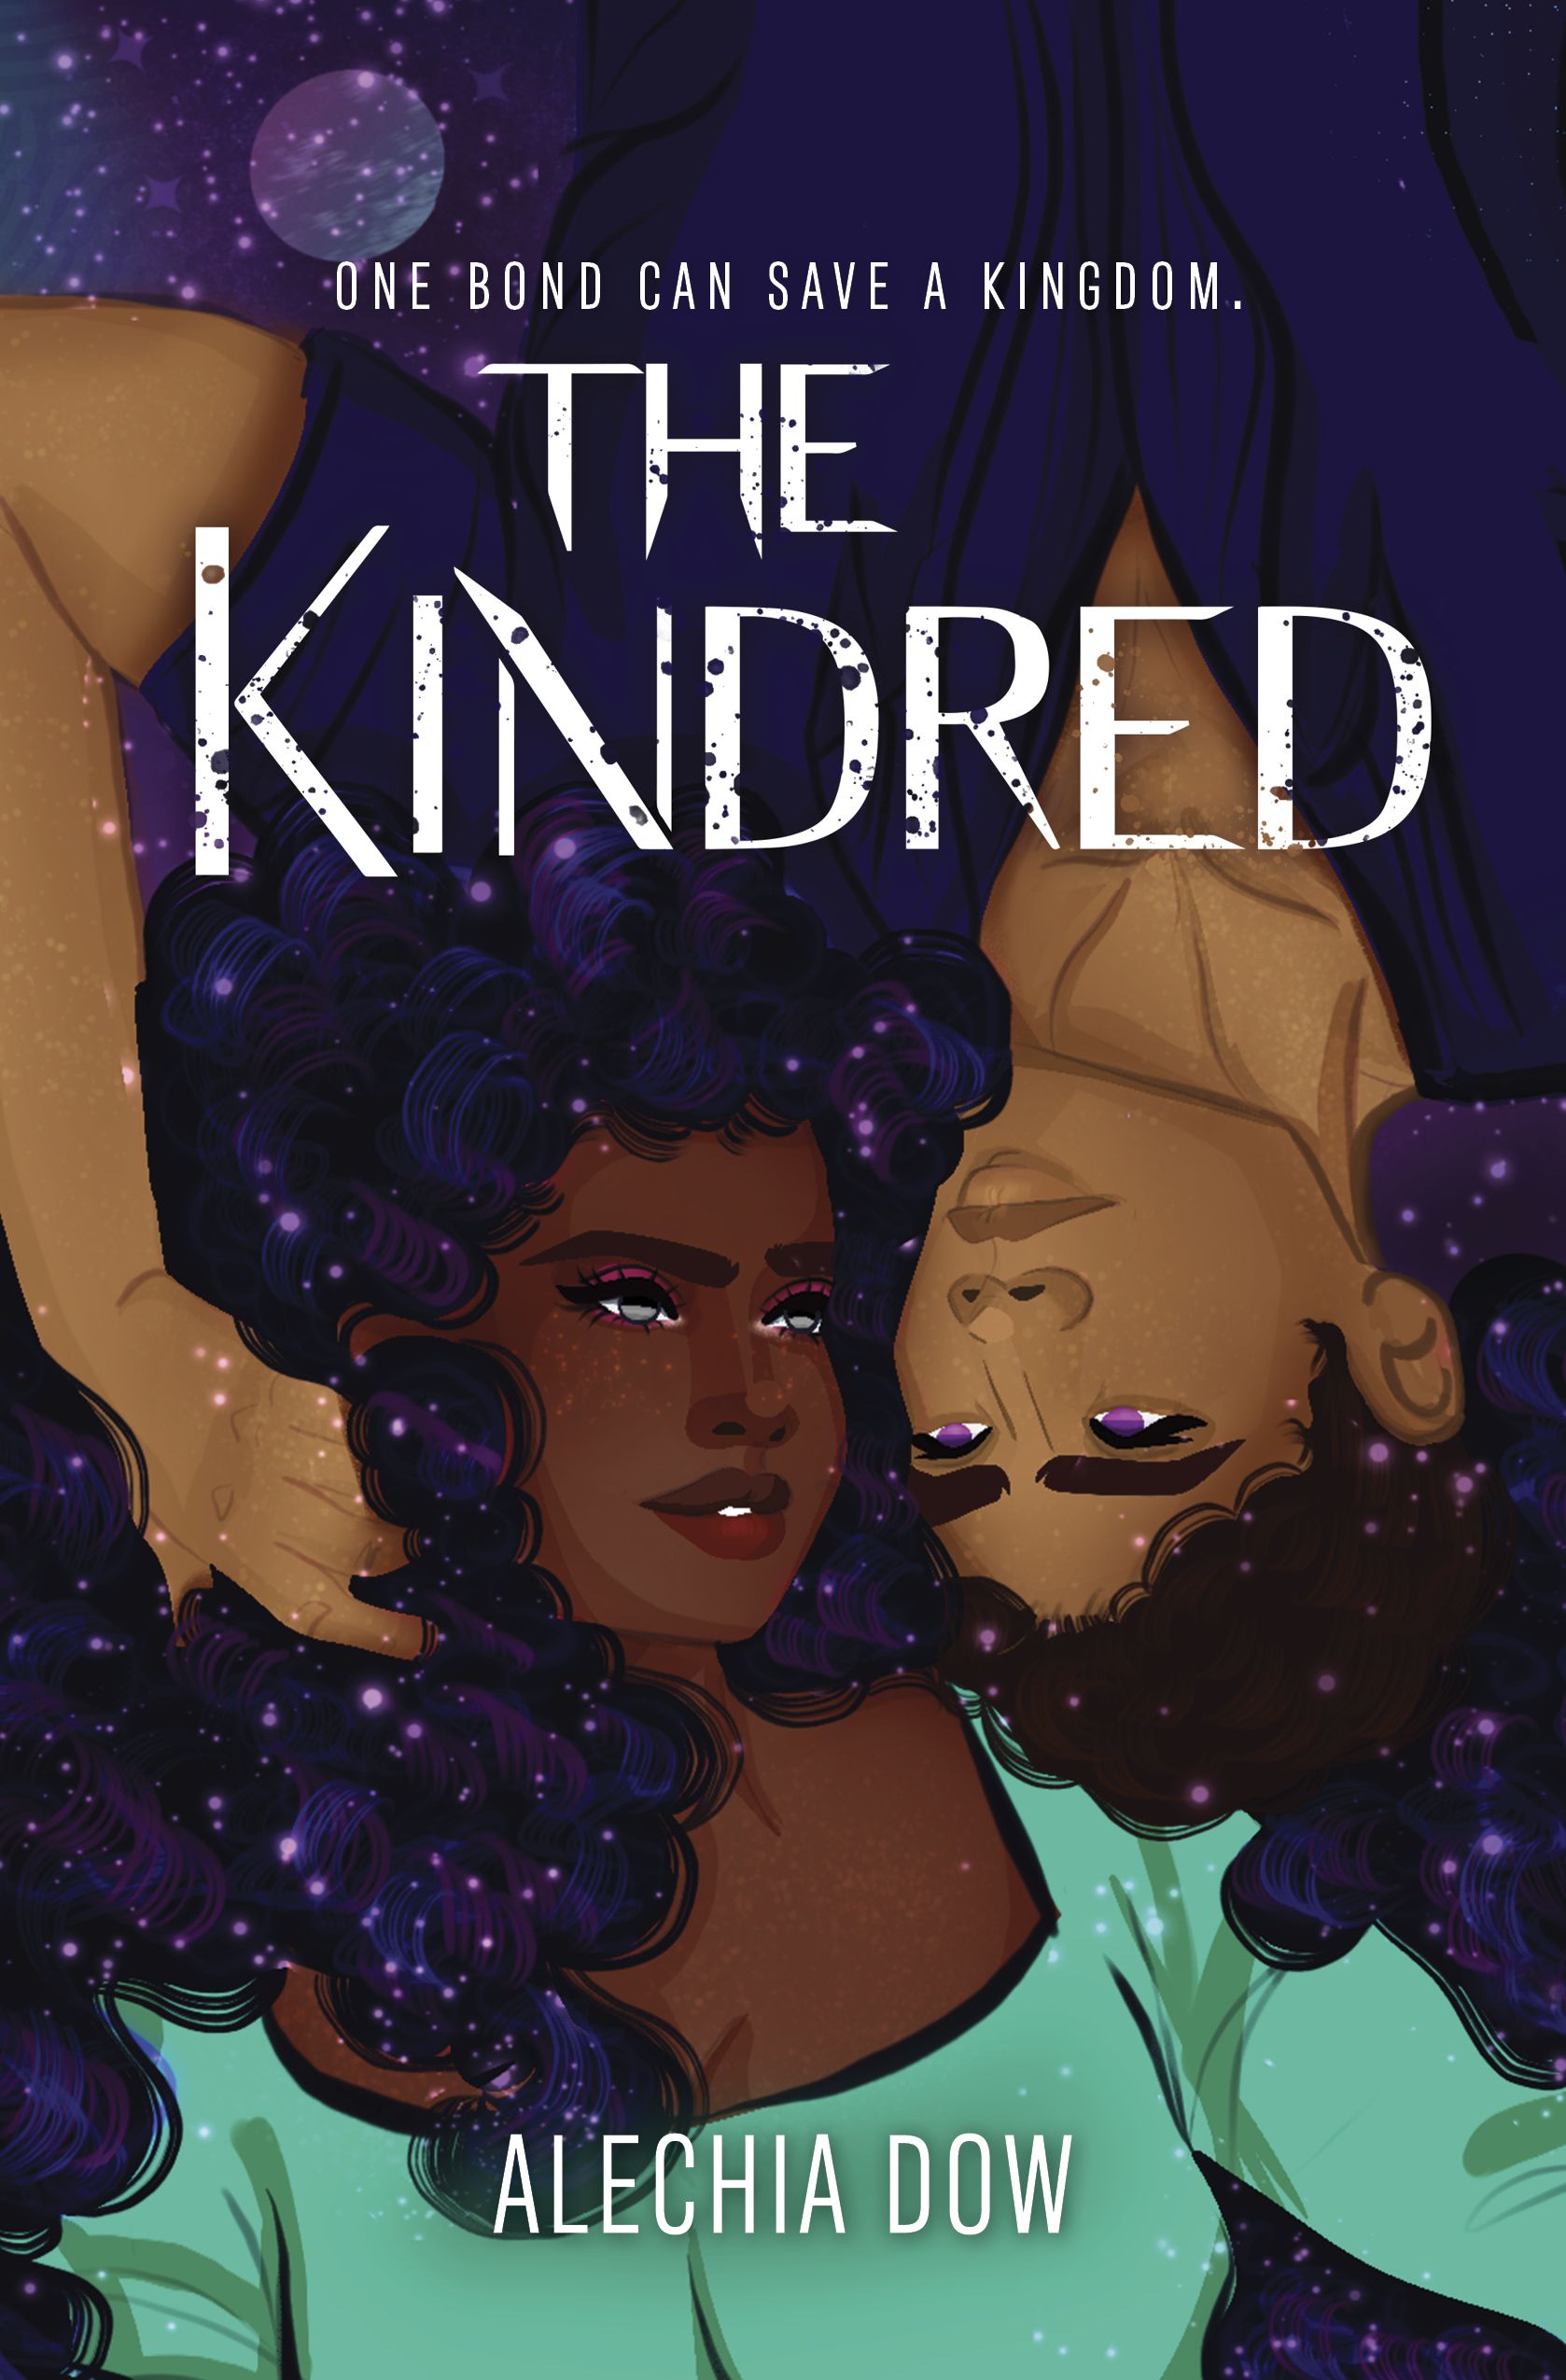 Cover of The Kindred by Alechia Dow.